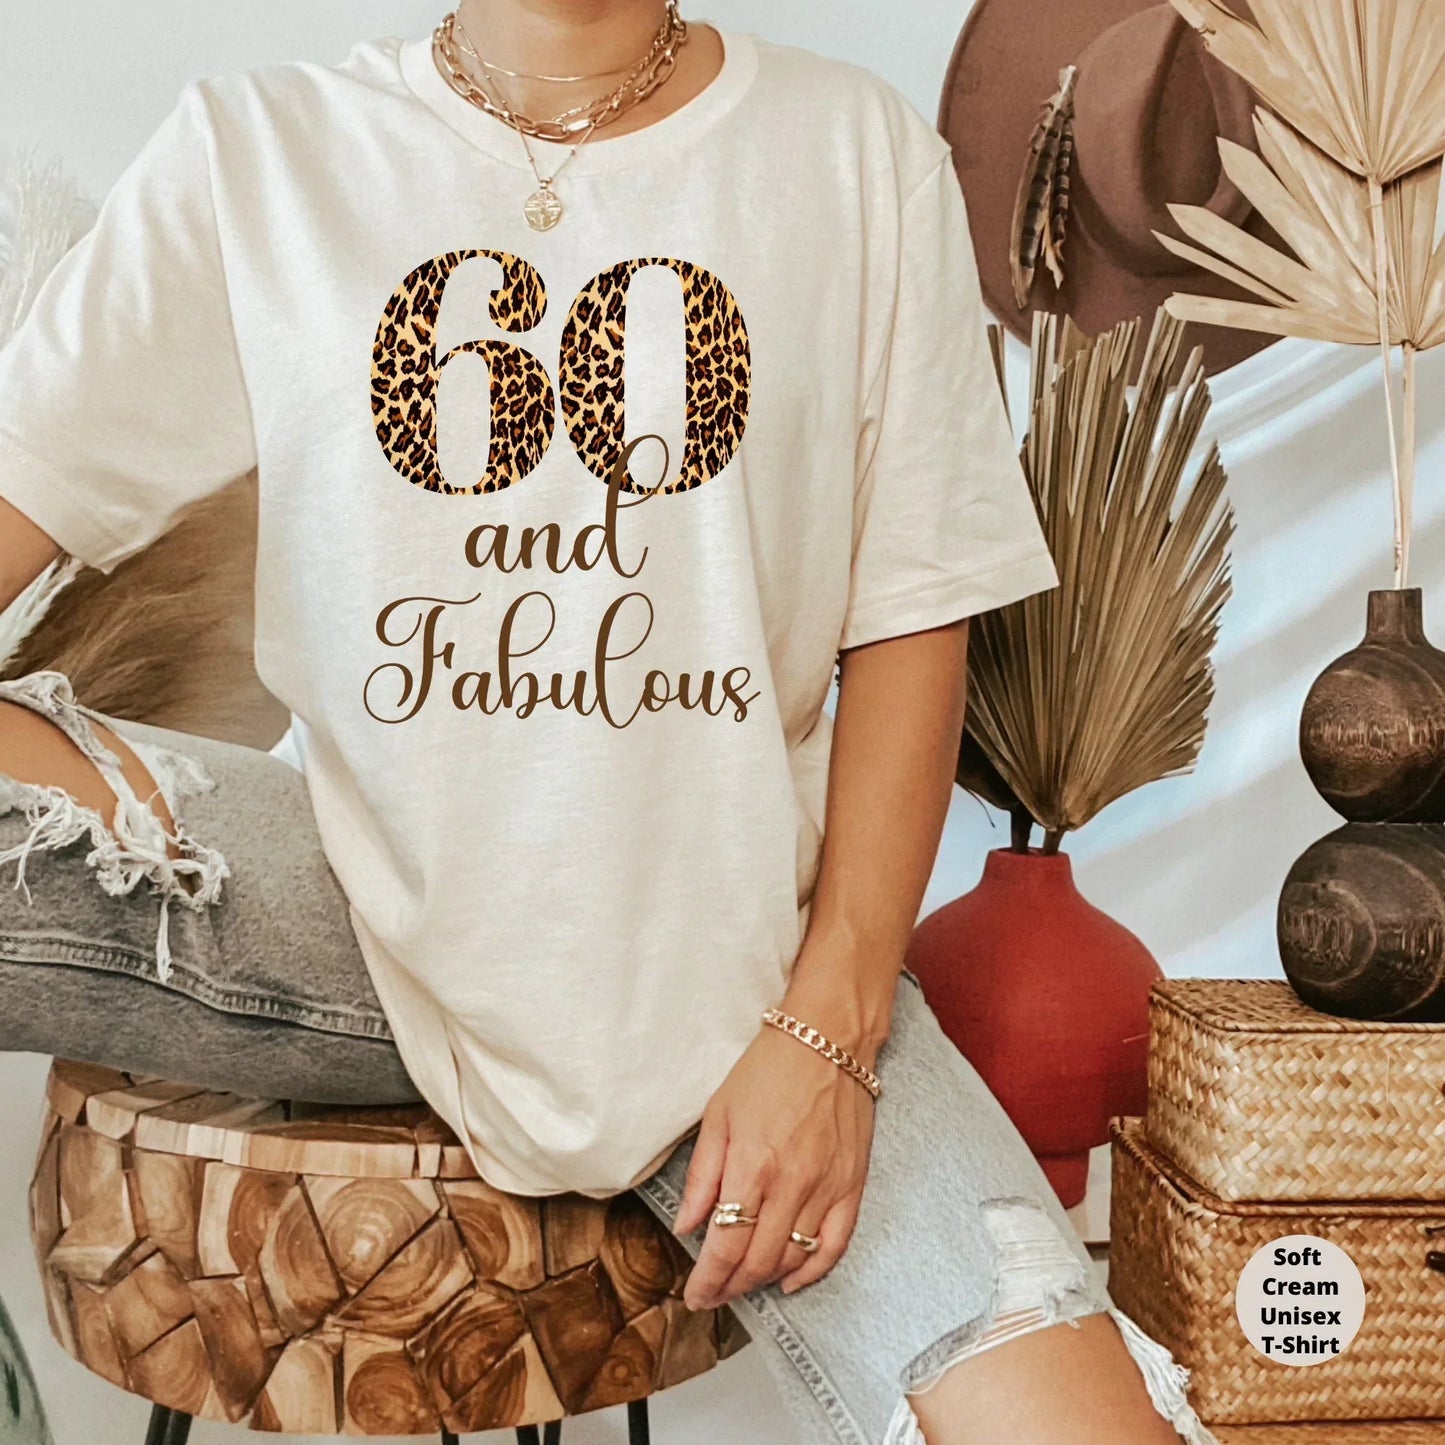 Sixty and Fabulous Birthday Shirt, Embrace Your Wisdom and Celebrate Your 60th Birthday with Style - Get Your Premium Birthday Shirt Today!